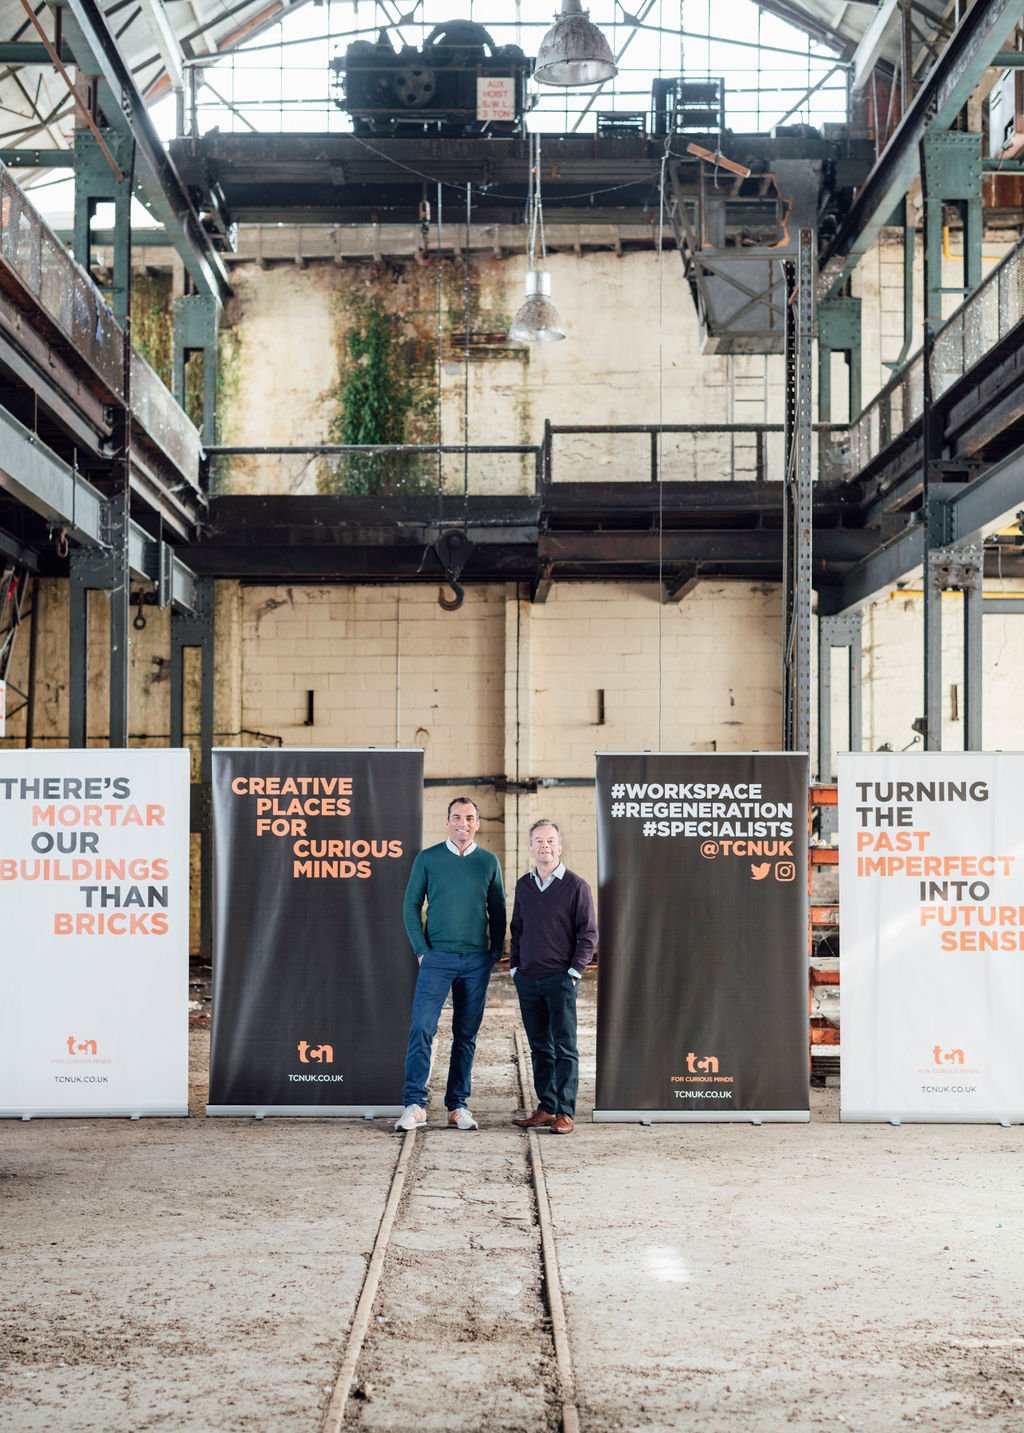 Newark Works Bath During Renovation With Two Men Stood In Space Between Banners